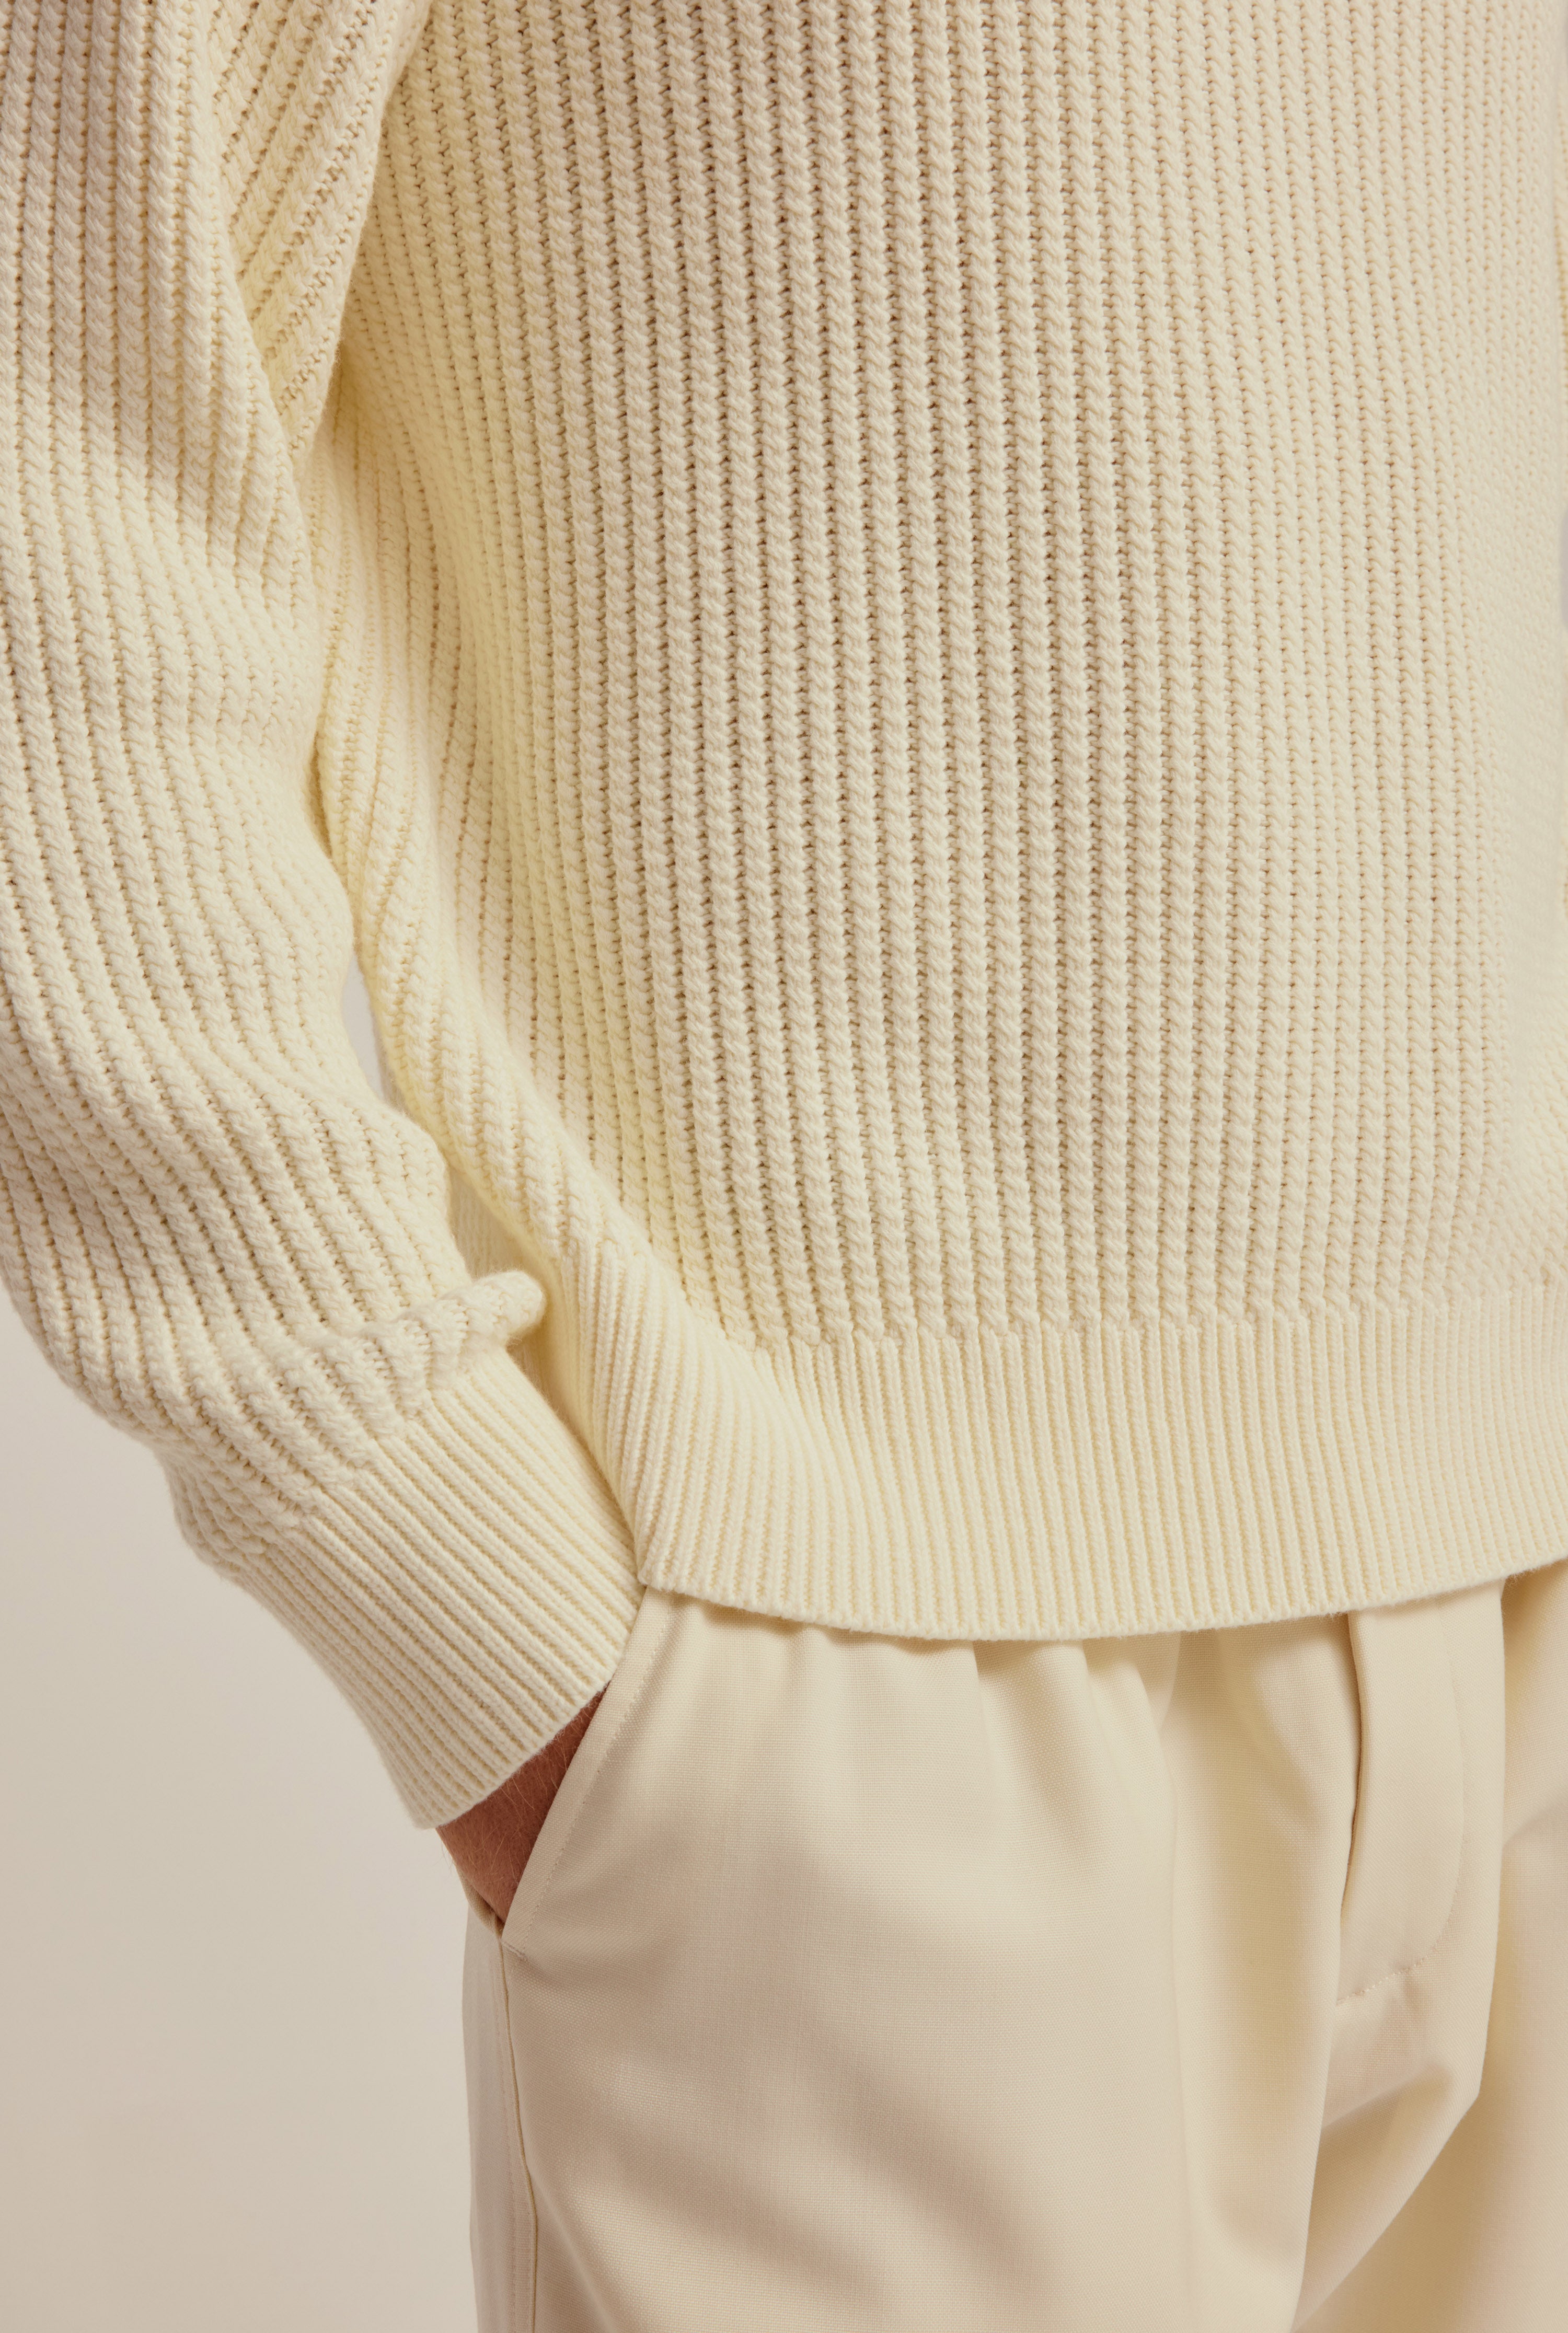 Cotton Rib Knitted Sweater - Antique White